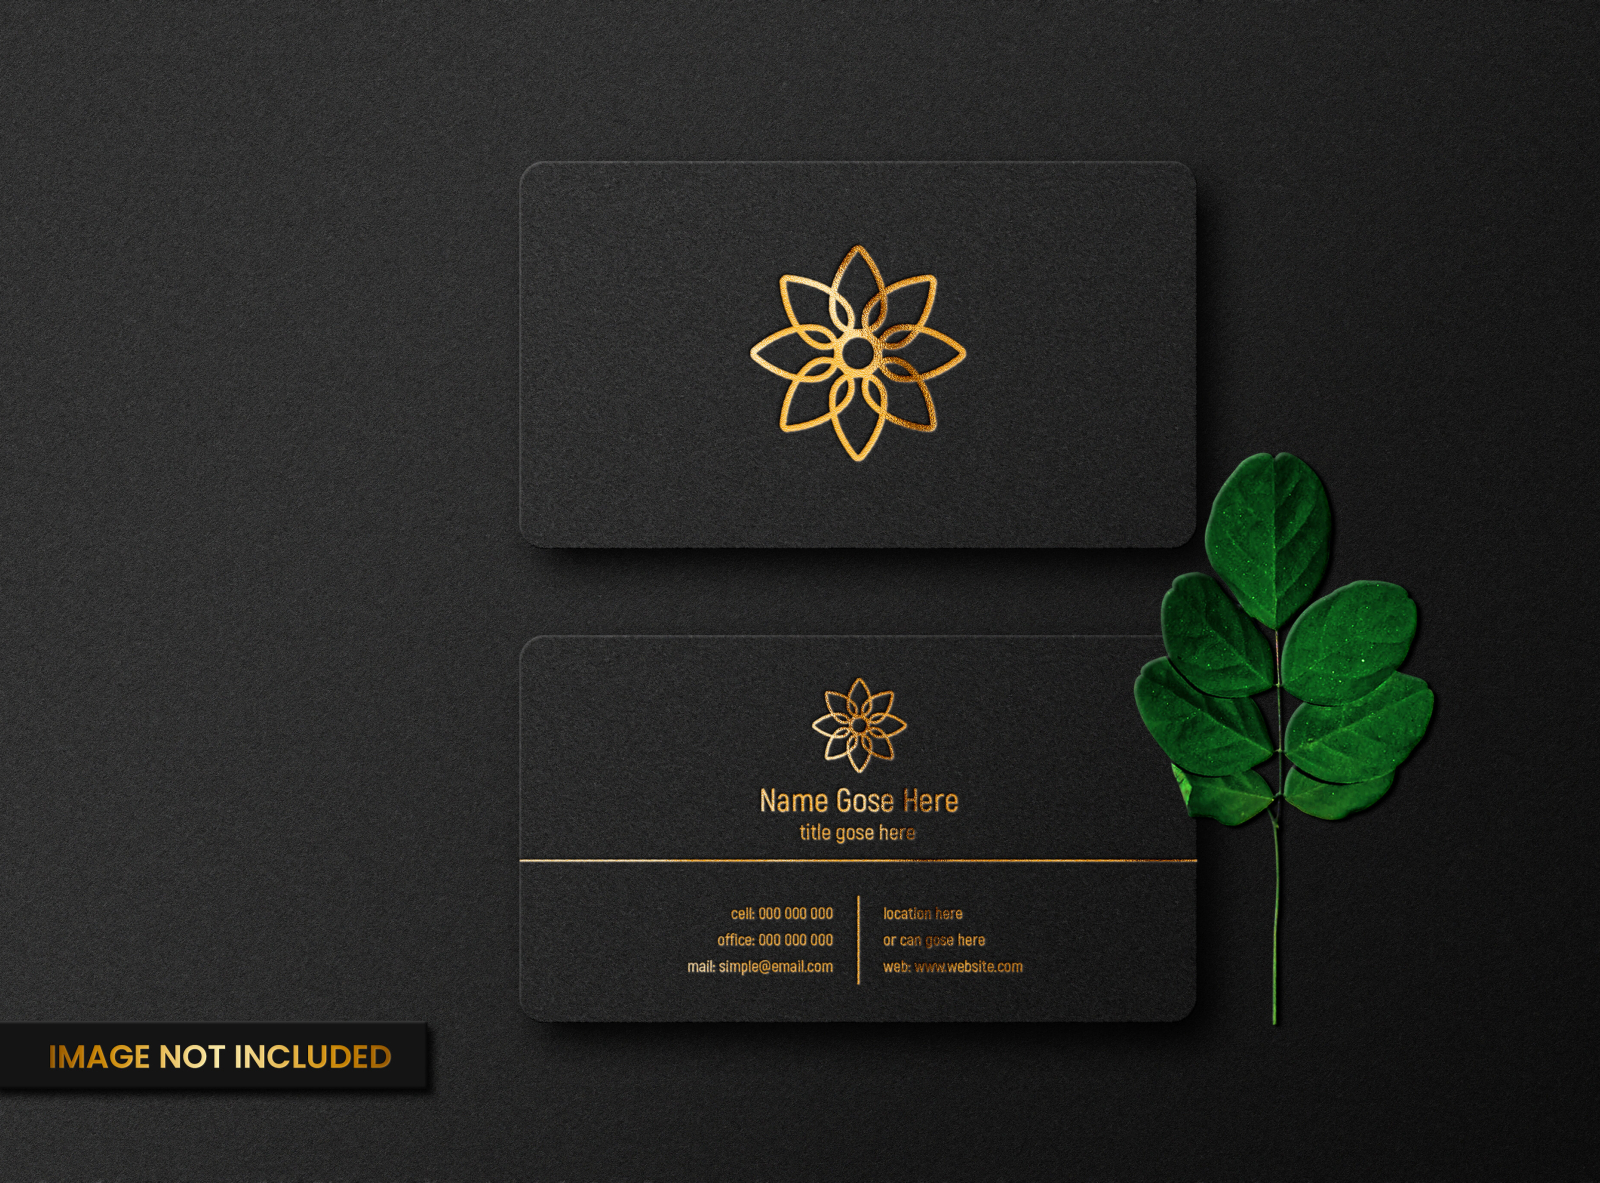 Download Luxury Business Card Mockup With Gold Letterpress Effect By Dipongar Sarkar On Dribbble